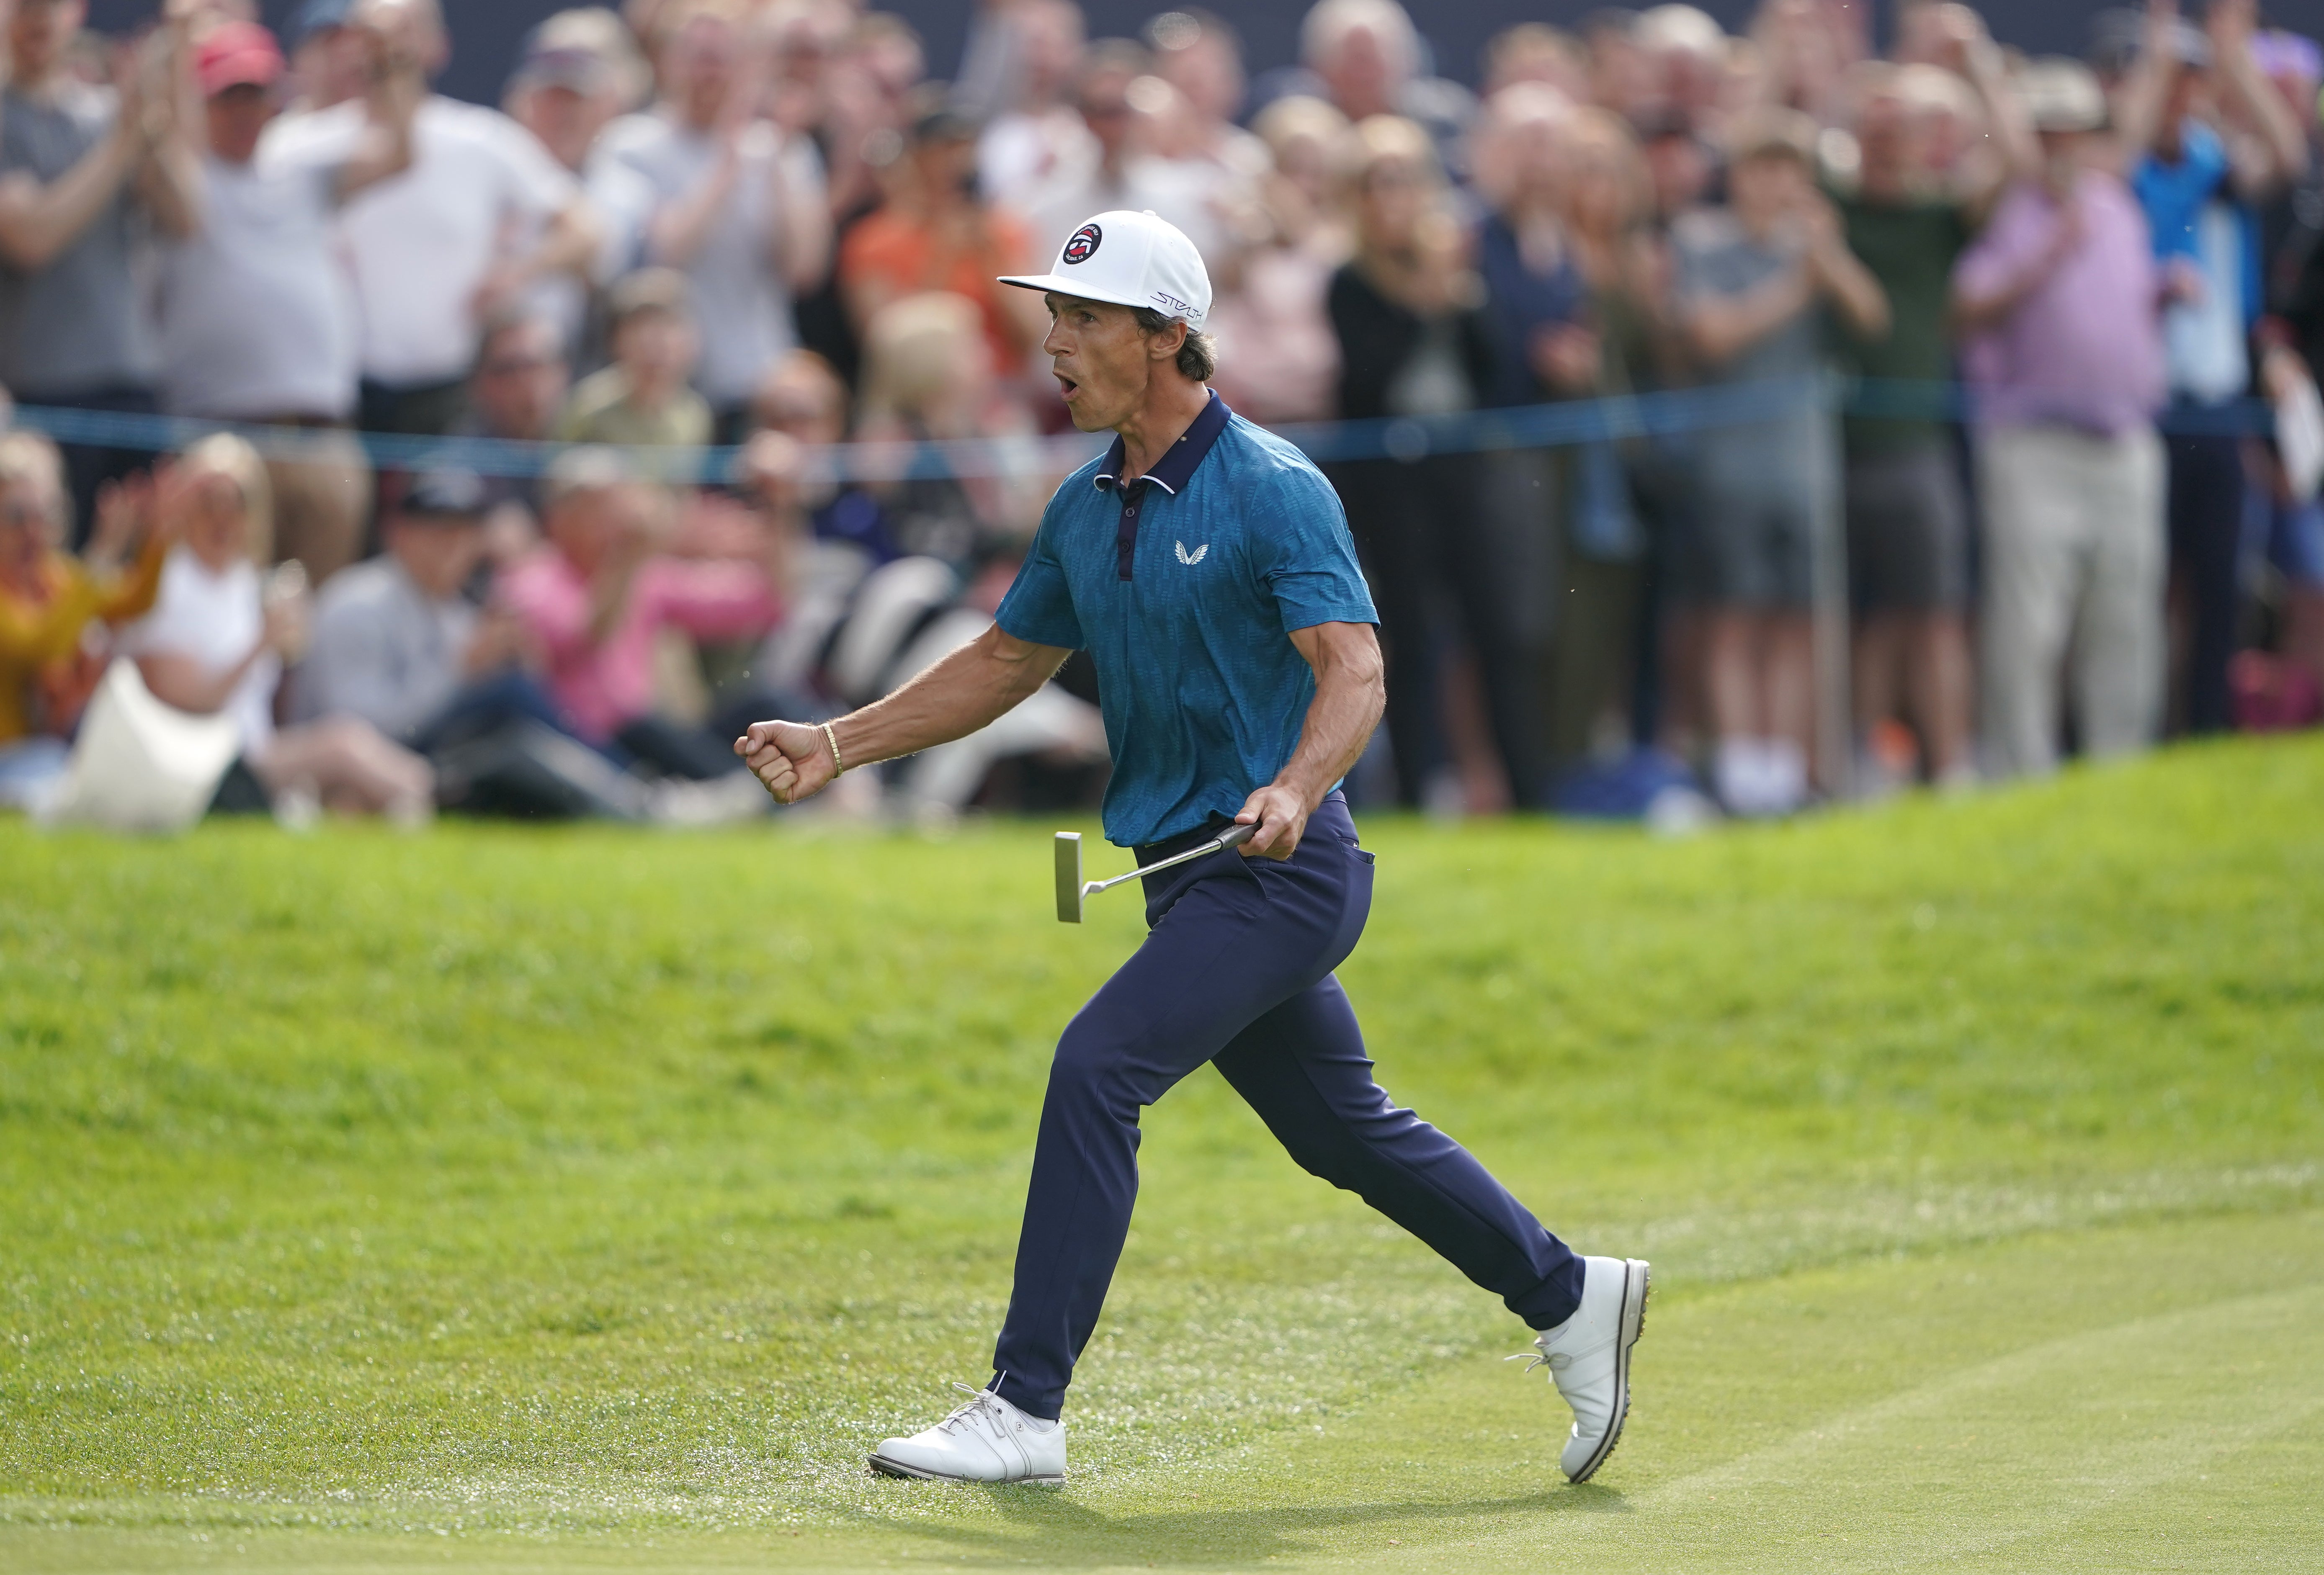 Denmark’s Thorbjorn Olesen celebrates winning with a birdie putt on the 18th hole in the final round of the Betfred British Masters (Zac Goodwin/PA)